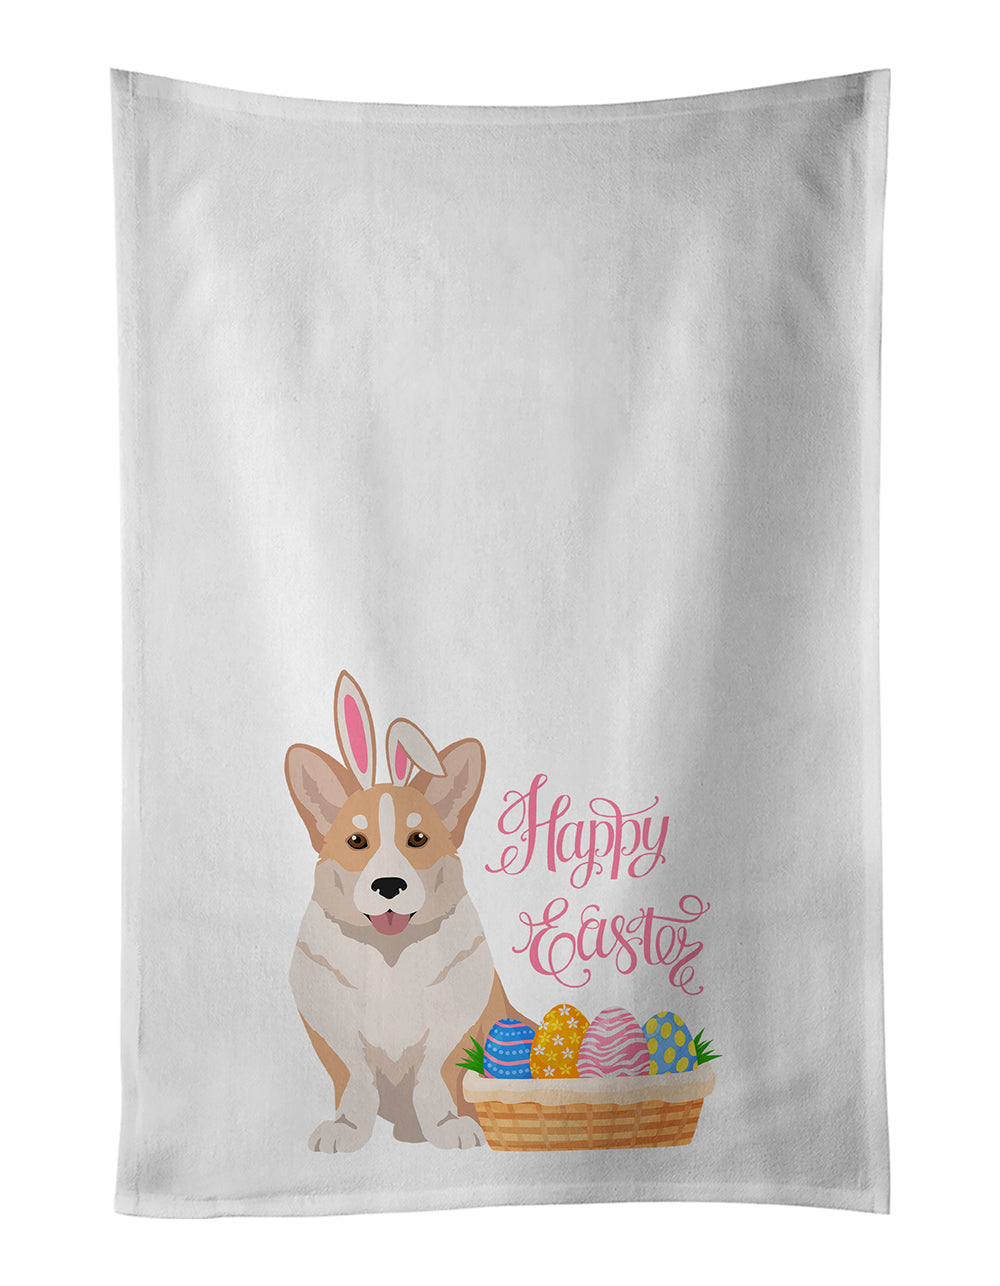 Buy this Fawn Cardigan Corgi Easter White Kitchen Towel Set of 2 Dish Towels